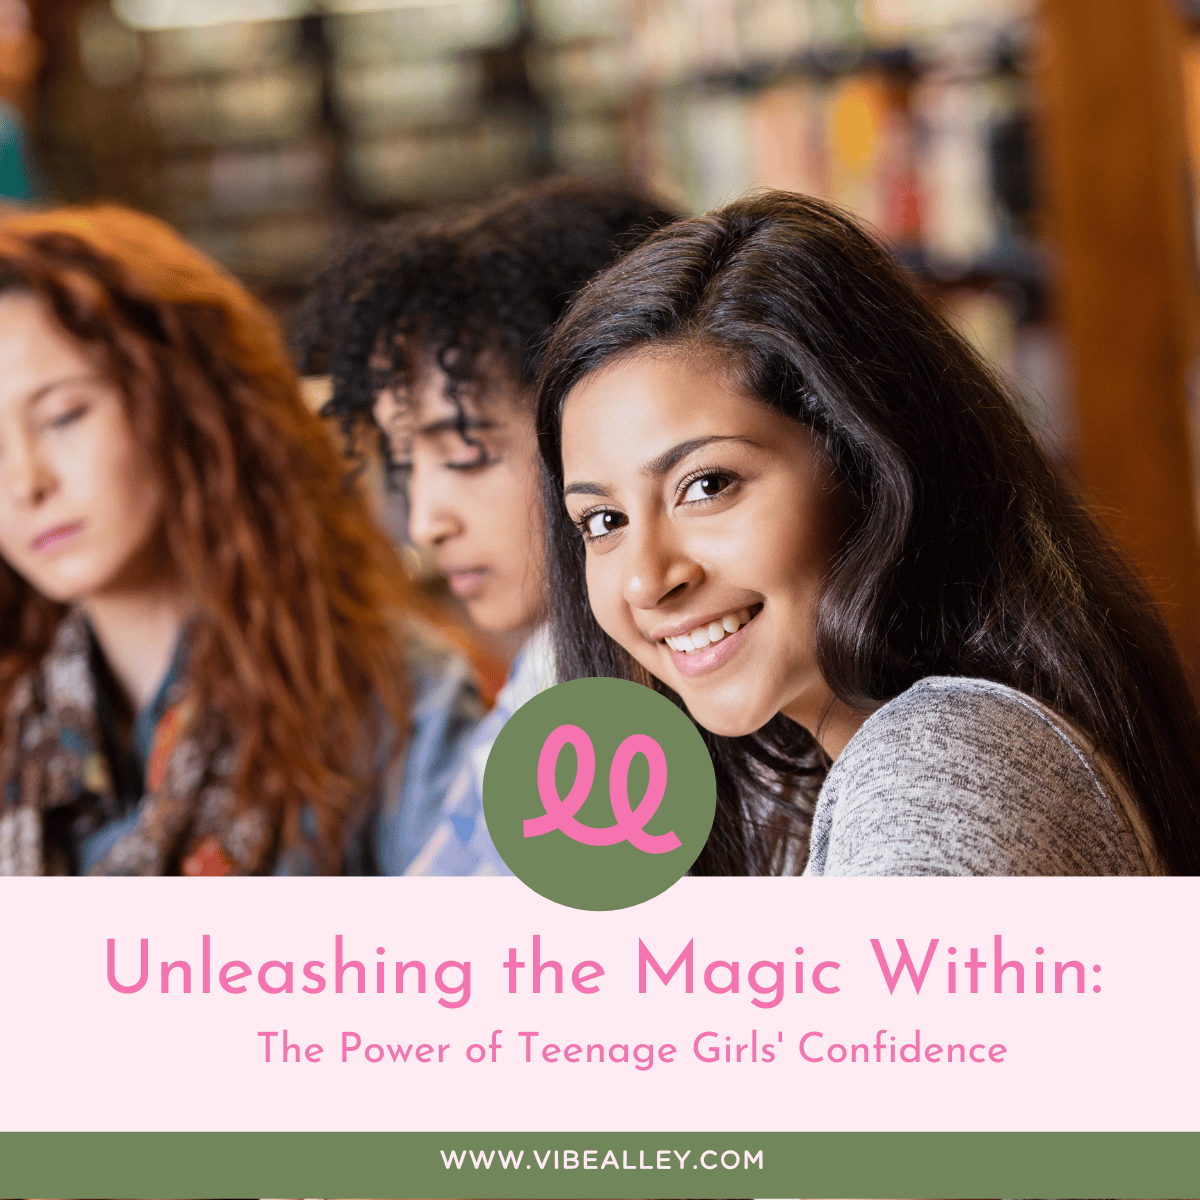 Unleashing the Magic Within: The Power of Teenage Girls' Confidence